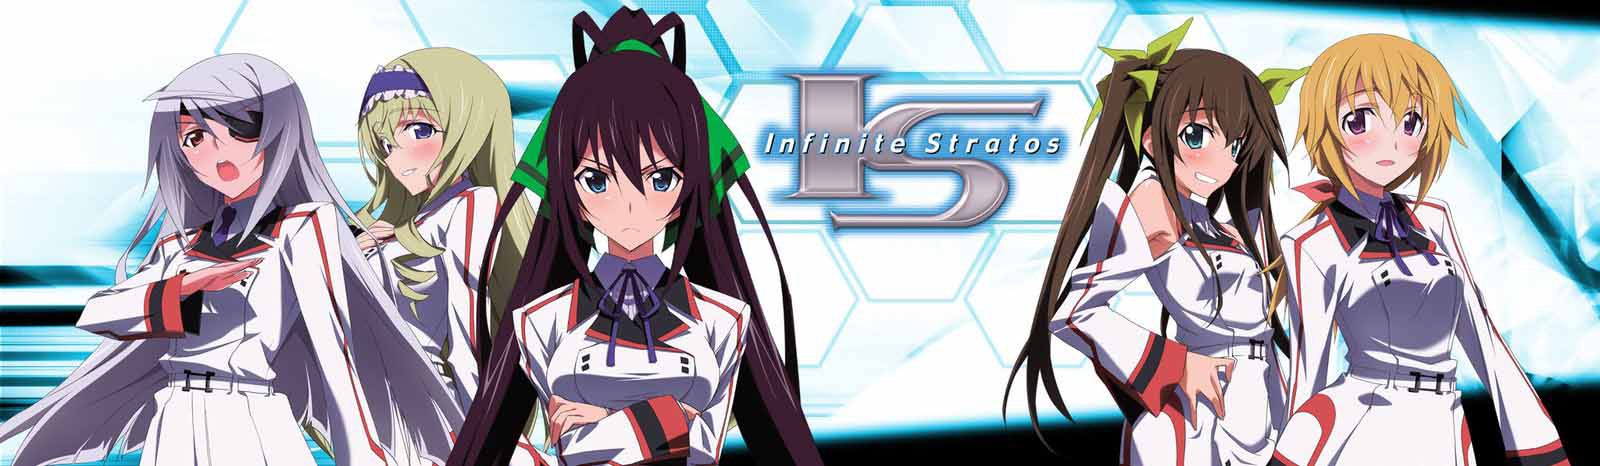 Banner for Infinite Stratos